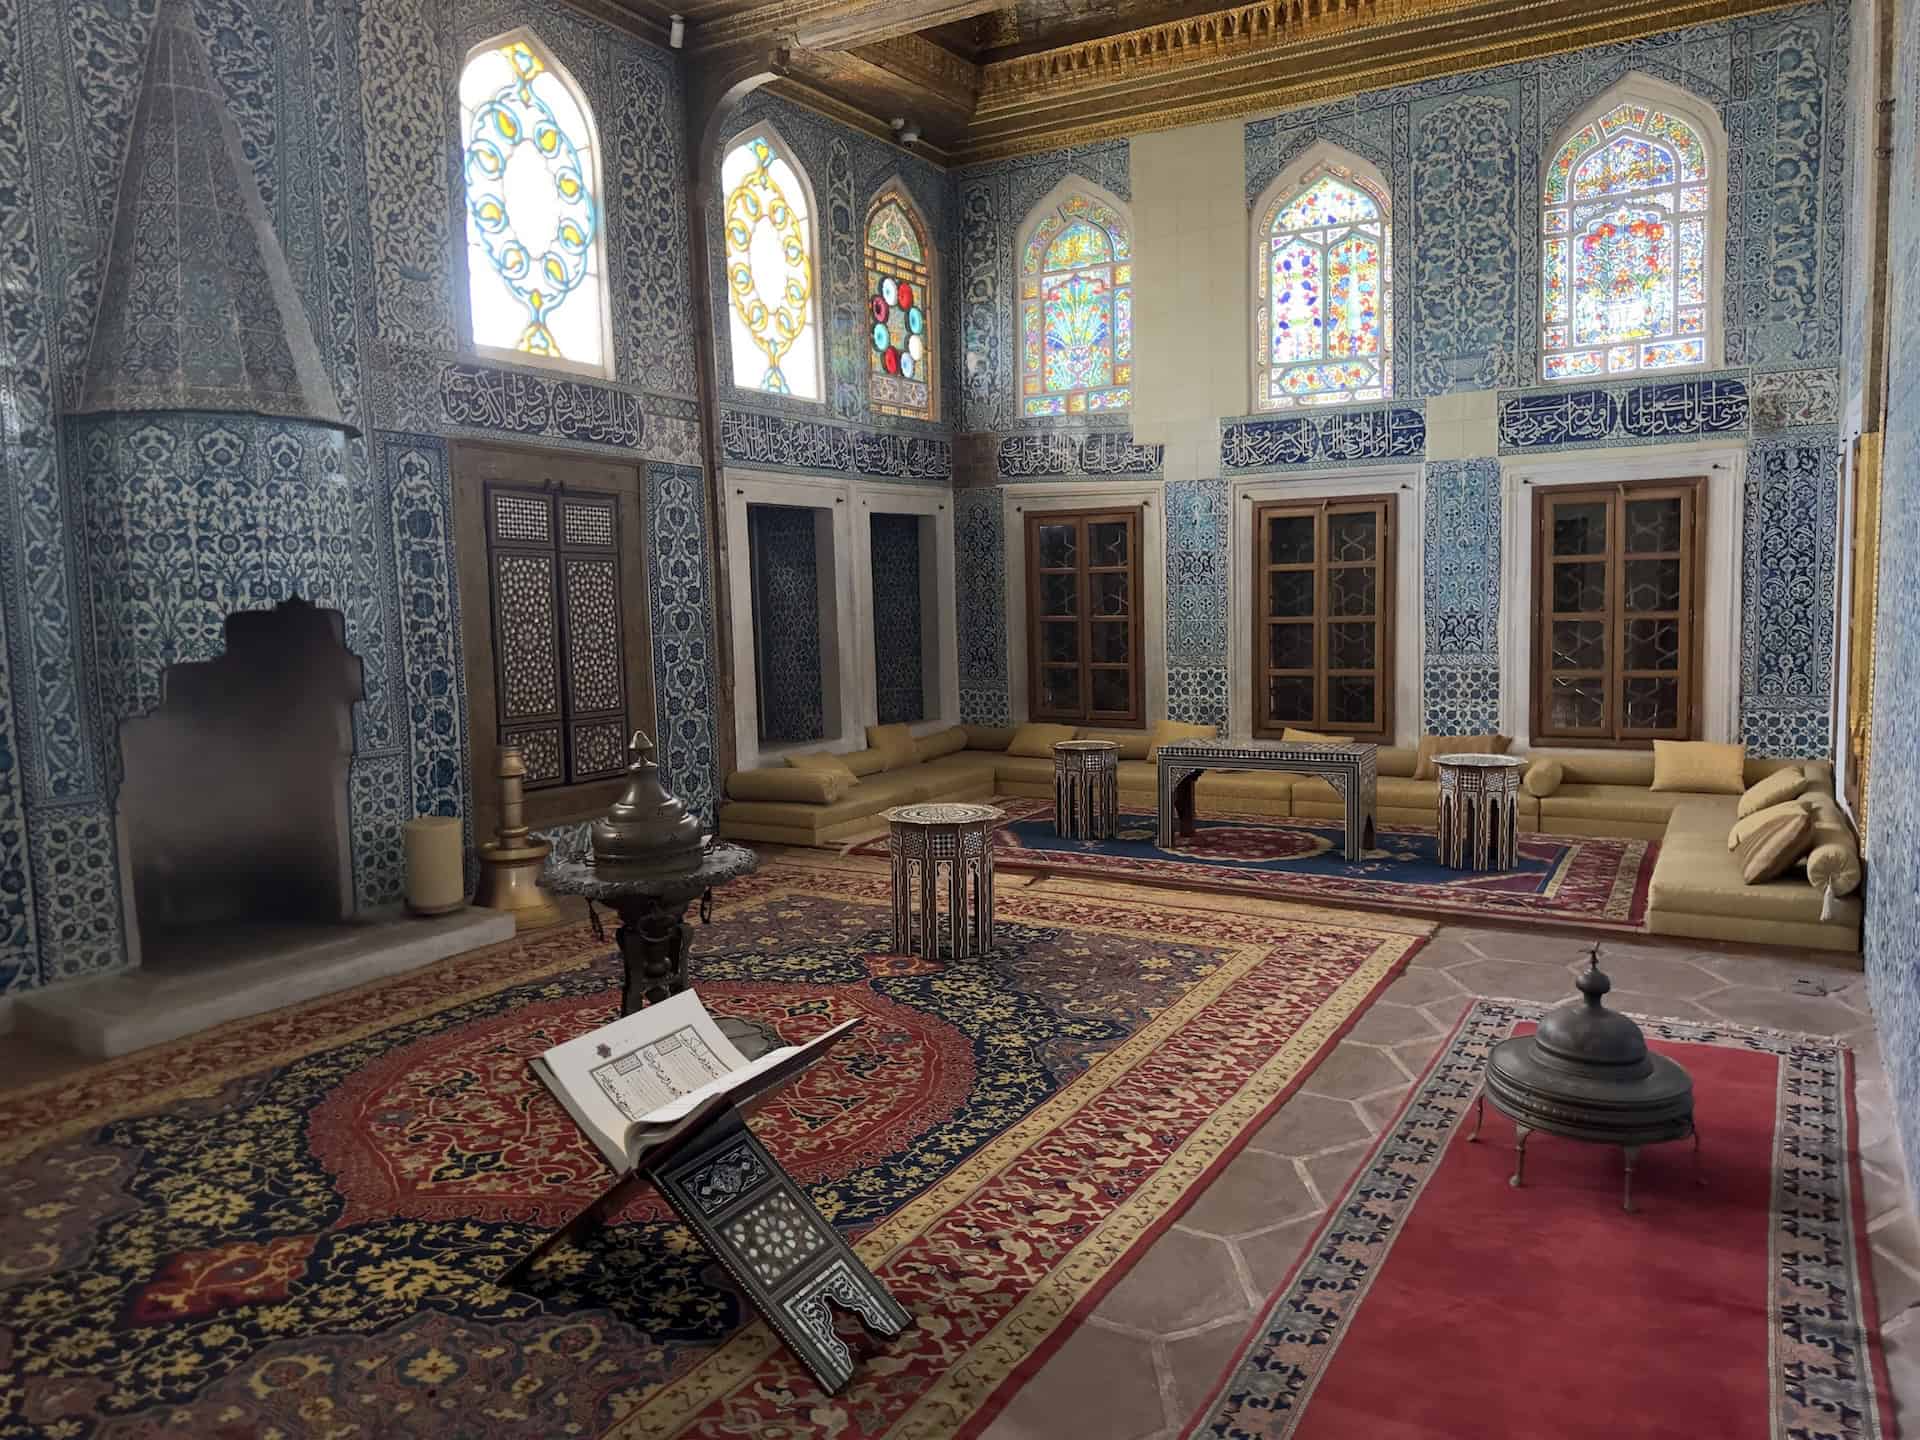 Main Room at the Sultan's Pavilion at the New Mosque in Eminönü, Istanbul, Turkey